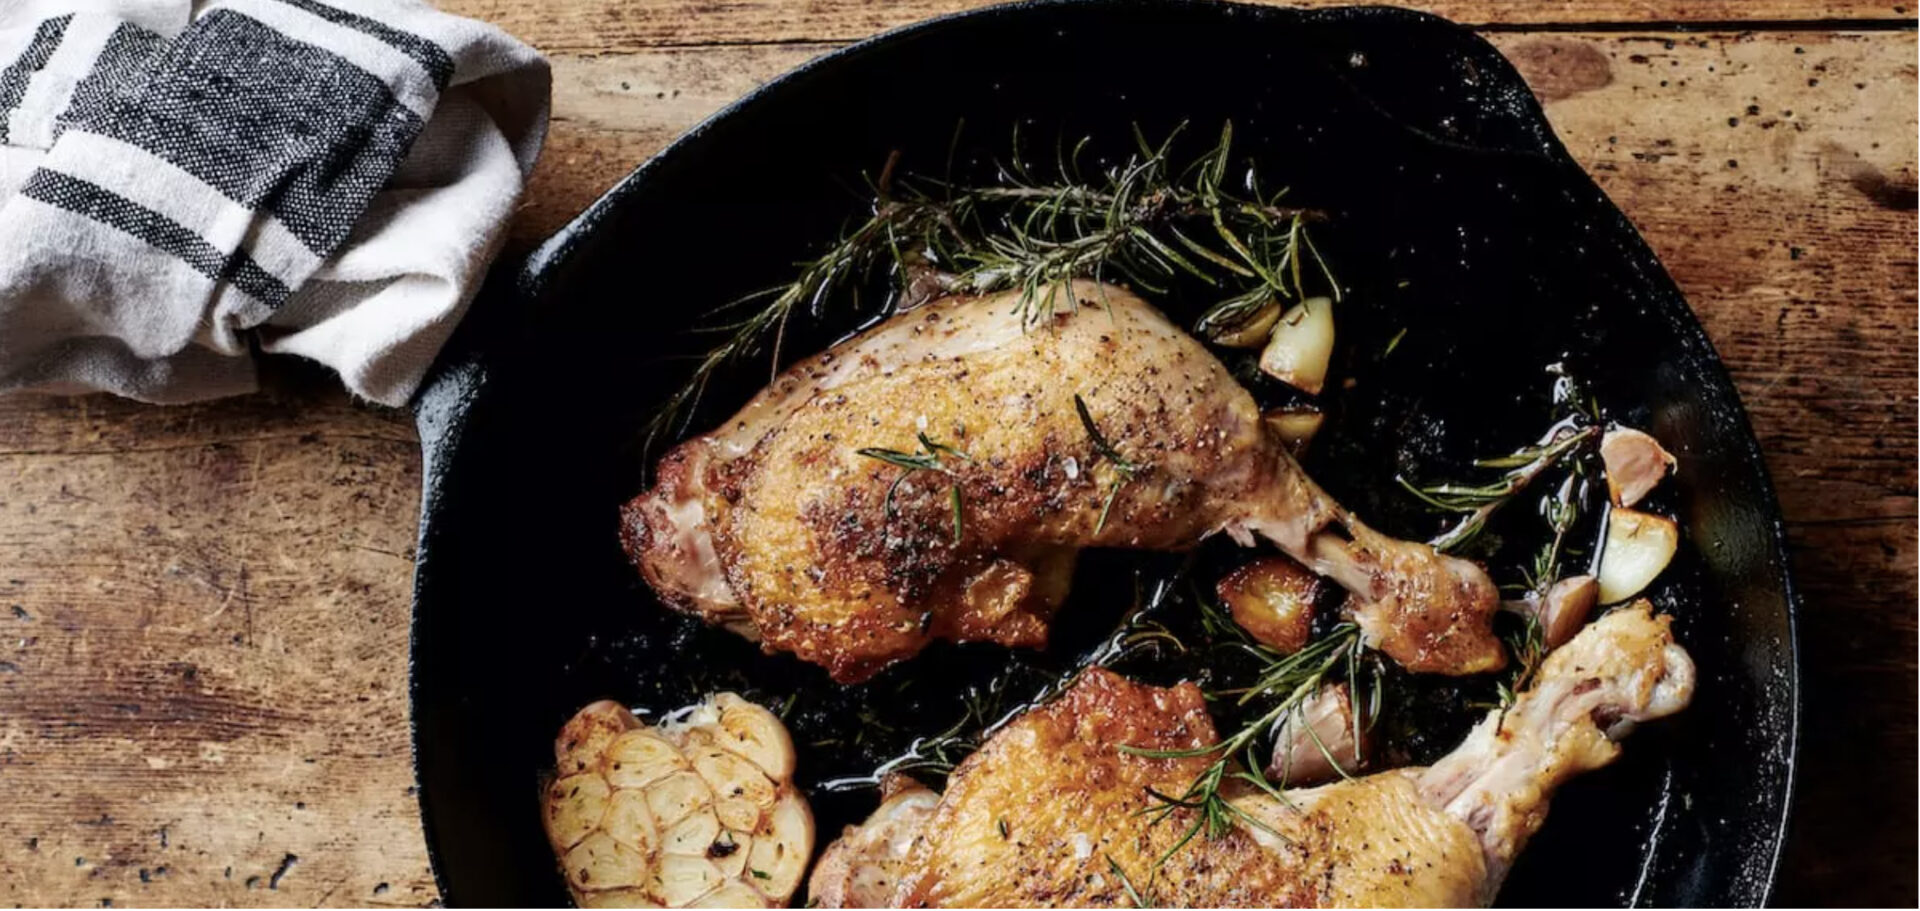 Skillet Chicken, one of our top recipes of 2023